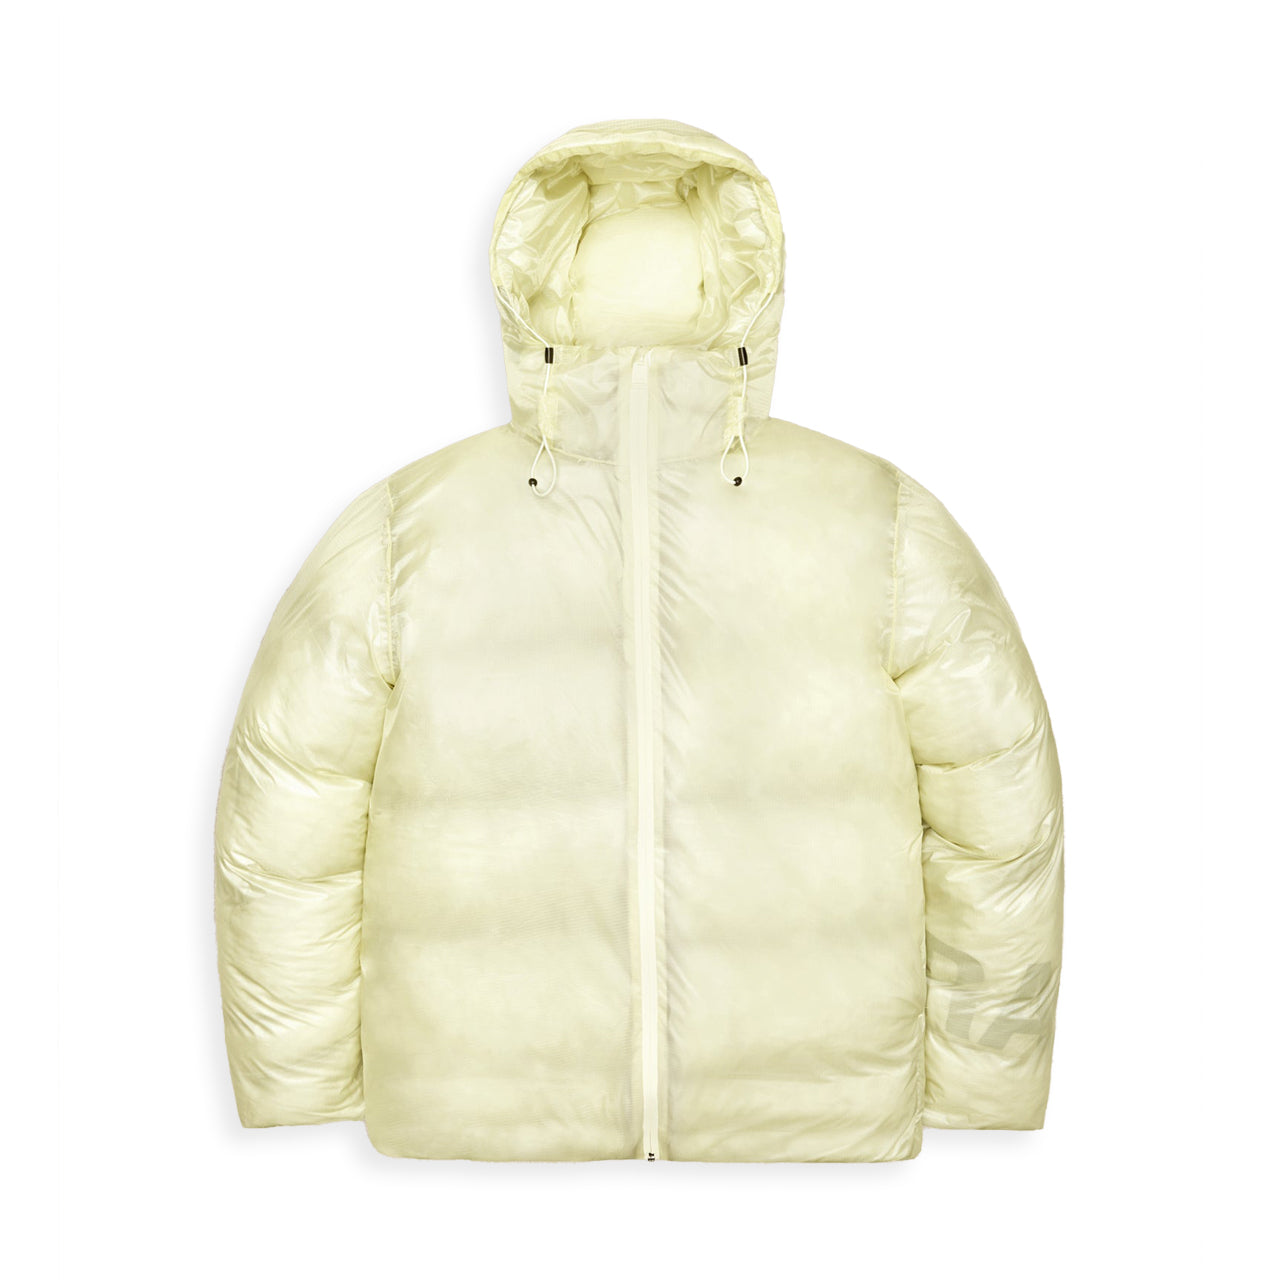 Rains Kevo Puffer Jacket | Uncrate Supply